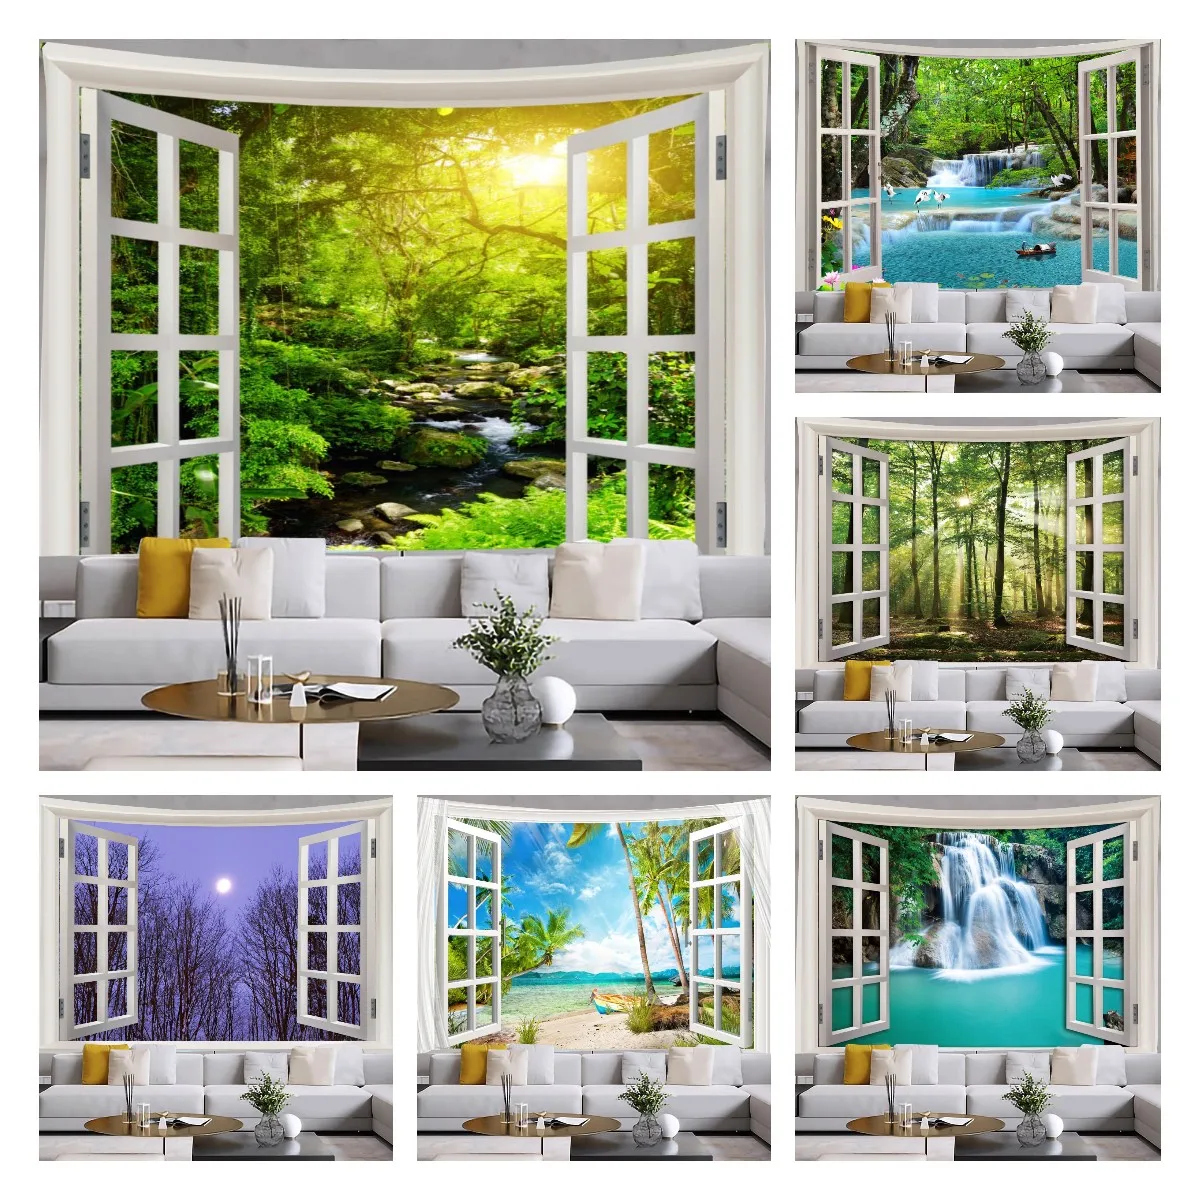 

Window Scenery Tapestry Wall Hanging for Bedroom Nature Landscpe Living Room Decor Aesthetic Home Decor Hippie Art Tapestries